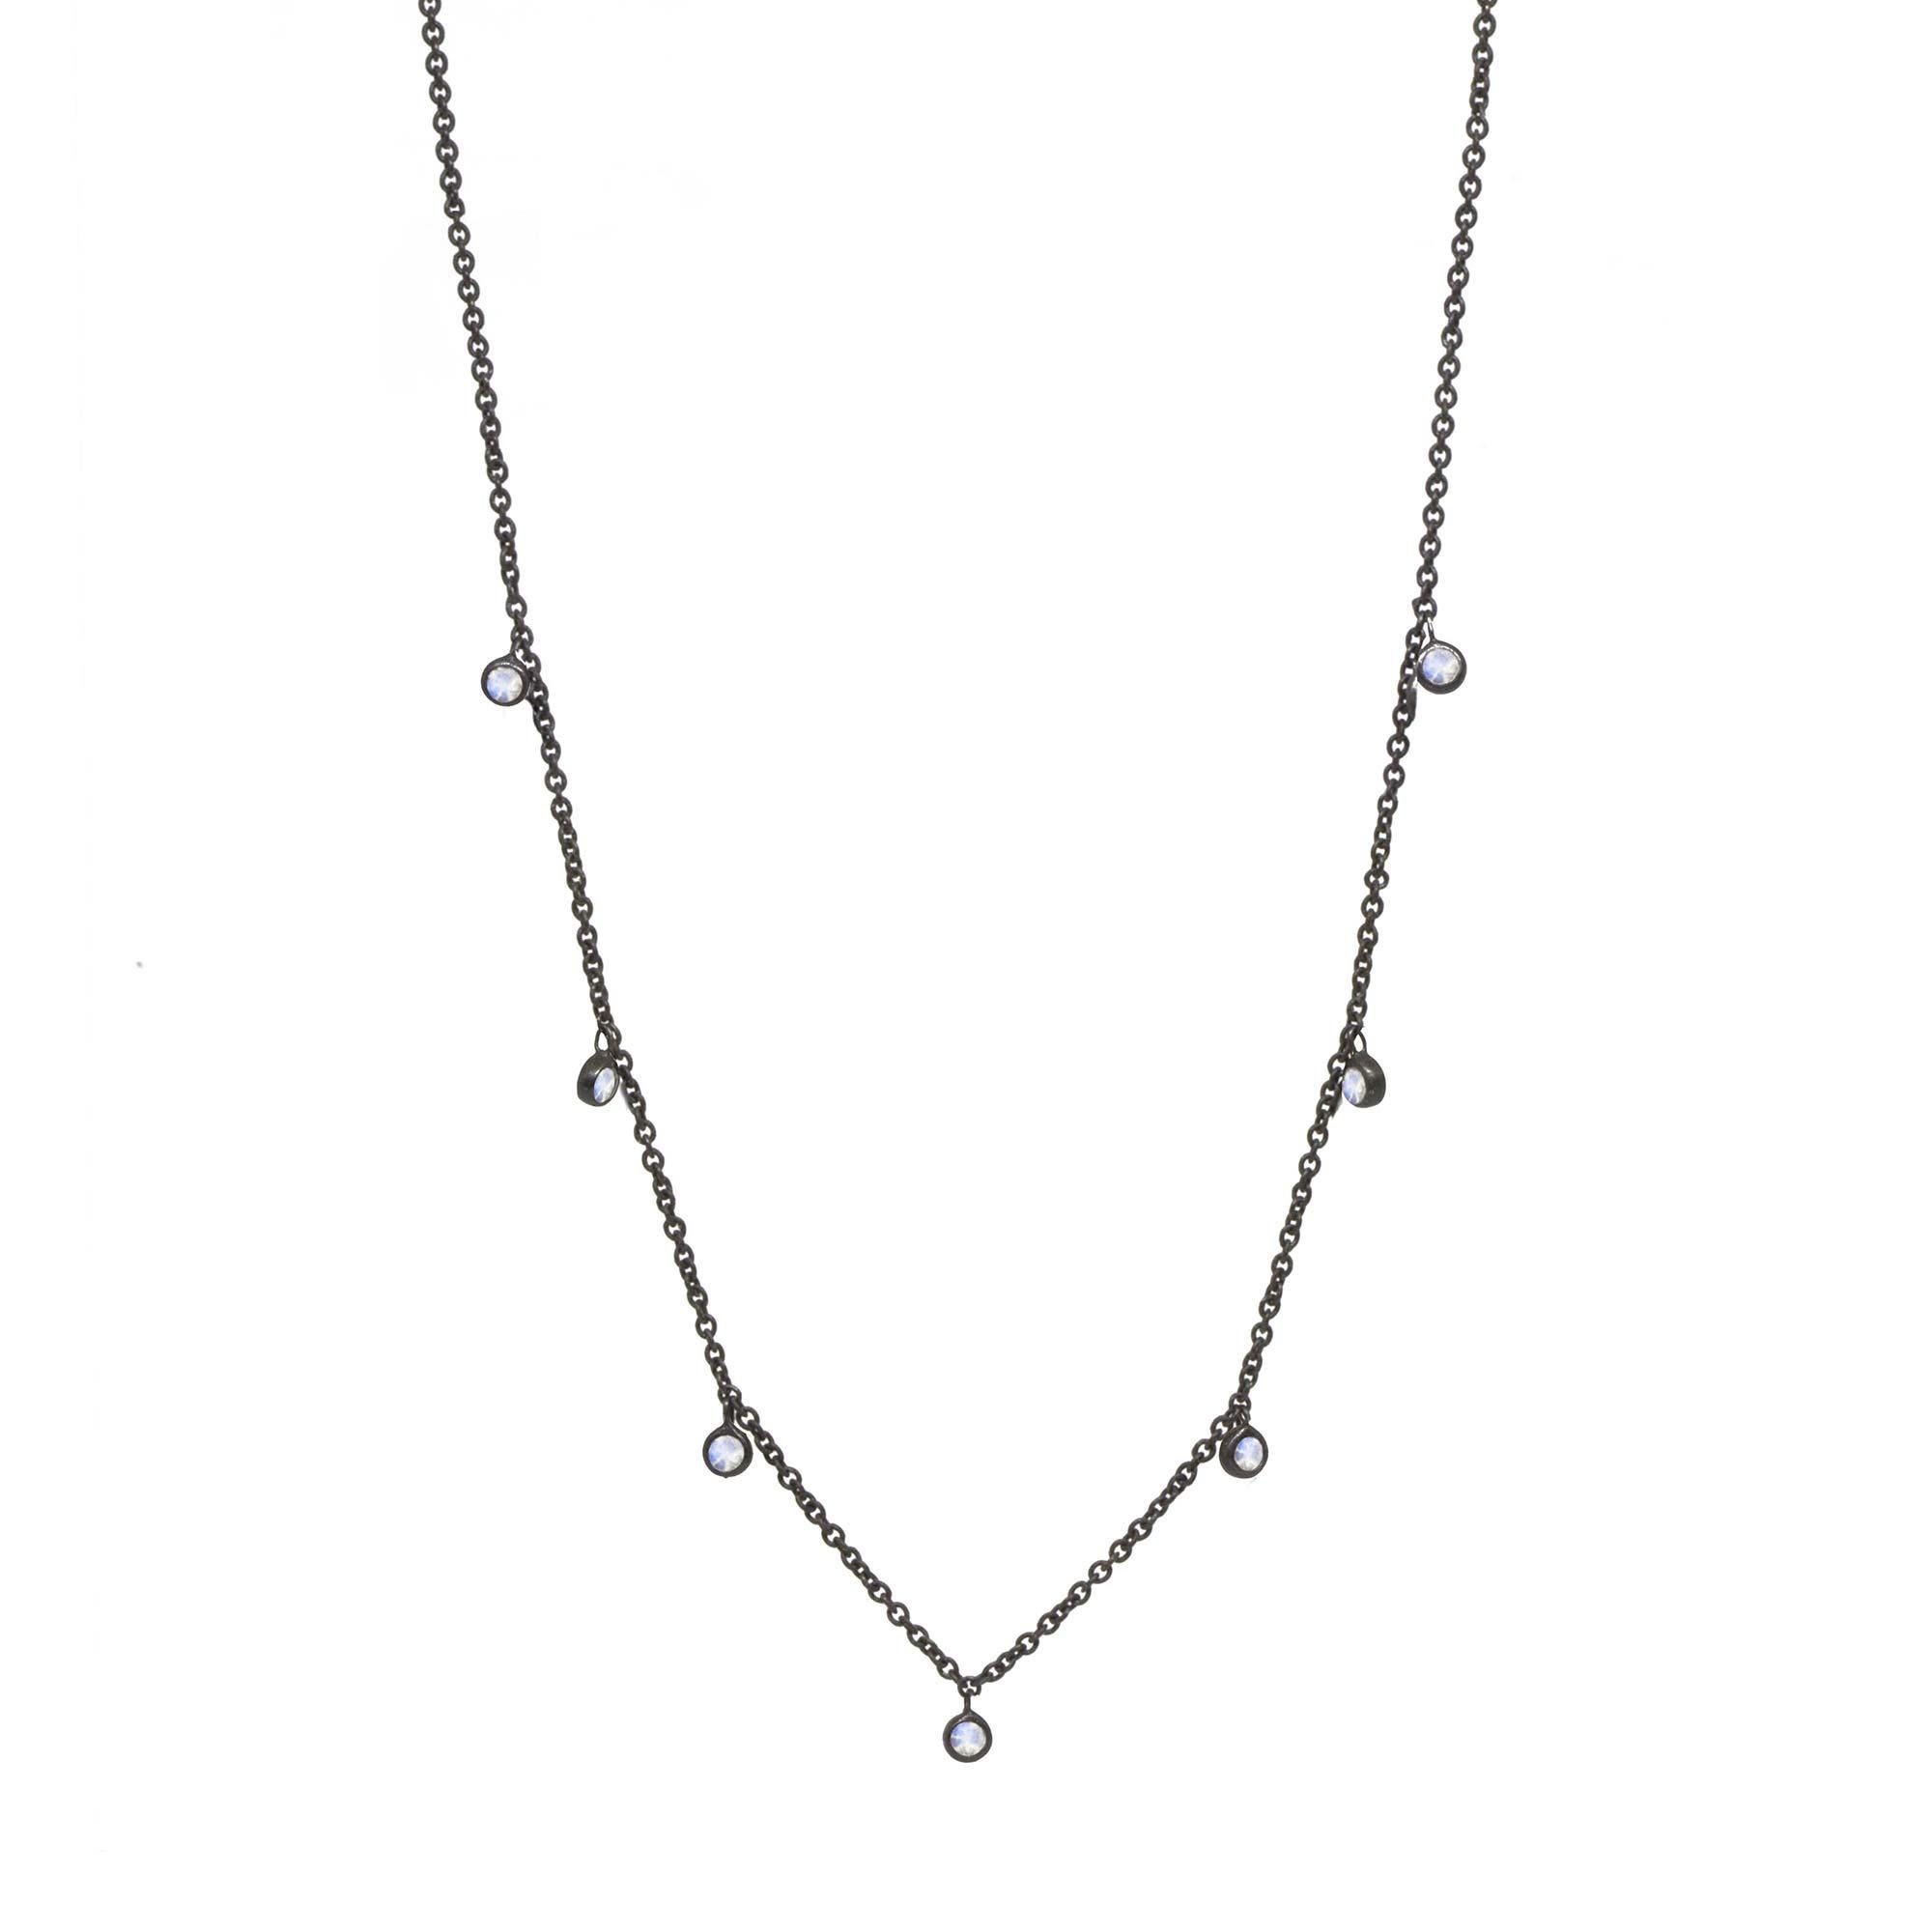 Made with moonstone gemstone rimmed in black oxidized silver, our Forged Silver Necklace provides an effortless, yet fashionable style.
 
Metal: Black Oxidized Silver
Stone carat: 0.75
Length: 15-17''
Stone size: 2.5mm

About the stones:
Genuine